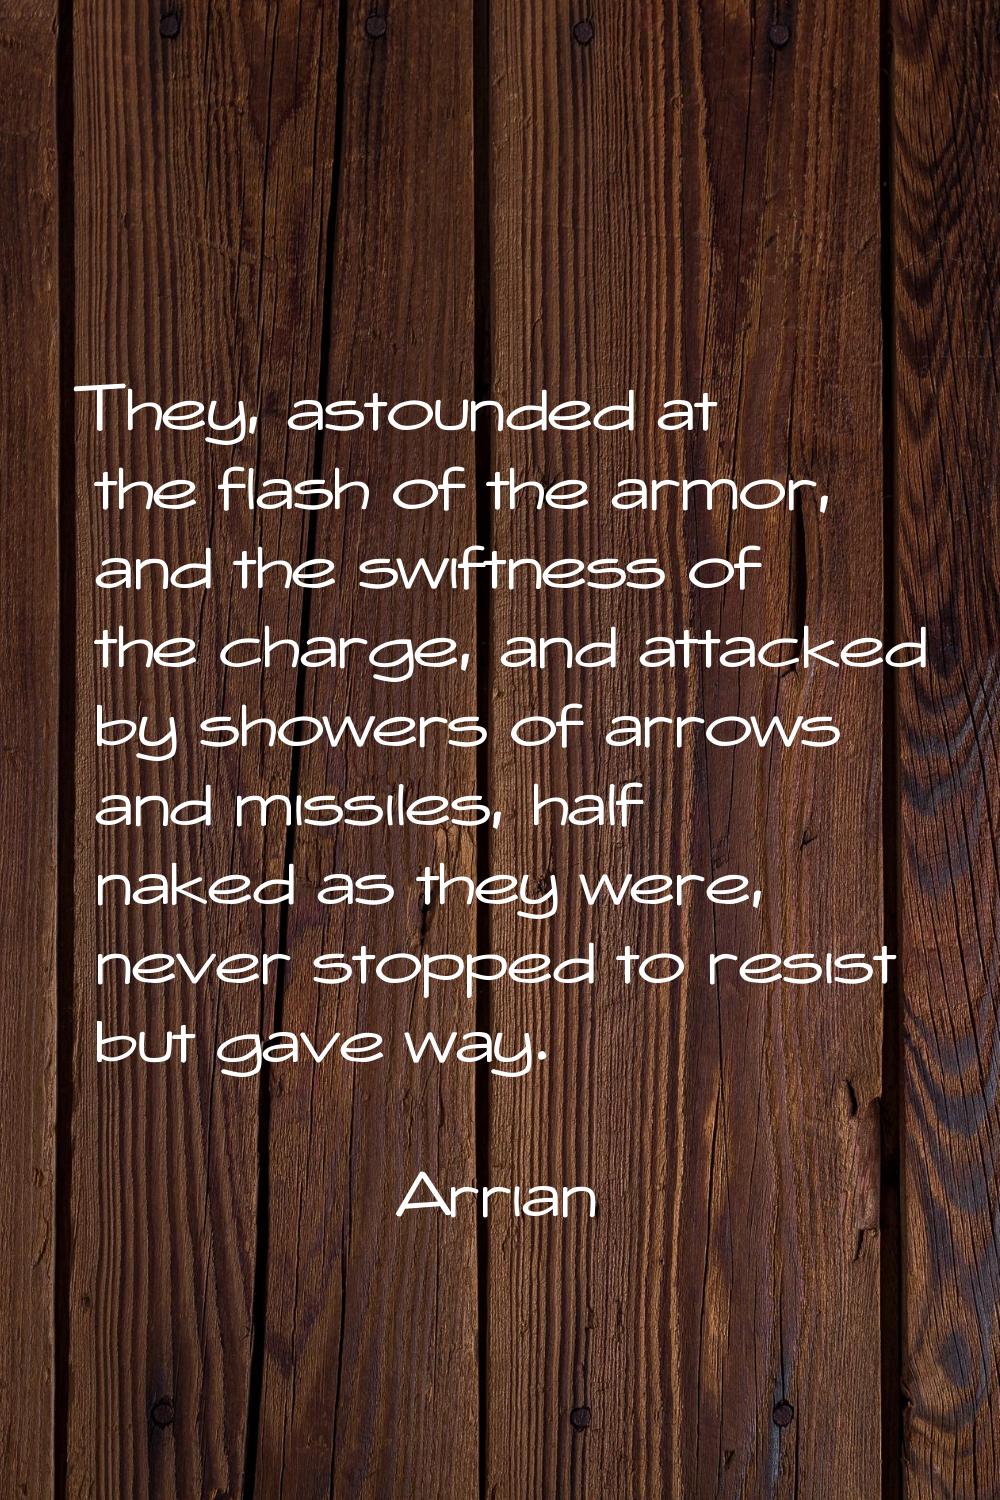 They, astounded at the flash of the armor, and the swiftness of the charge, and attacked by showers